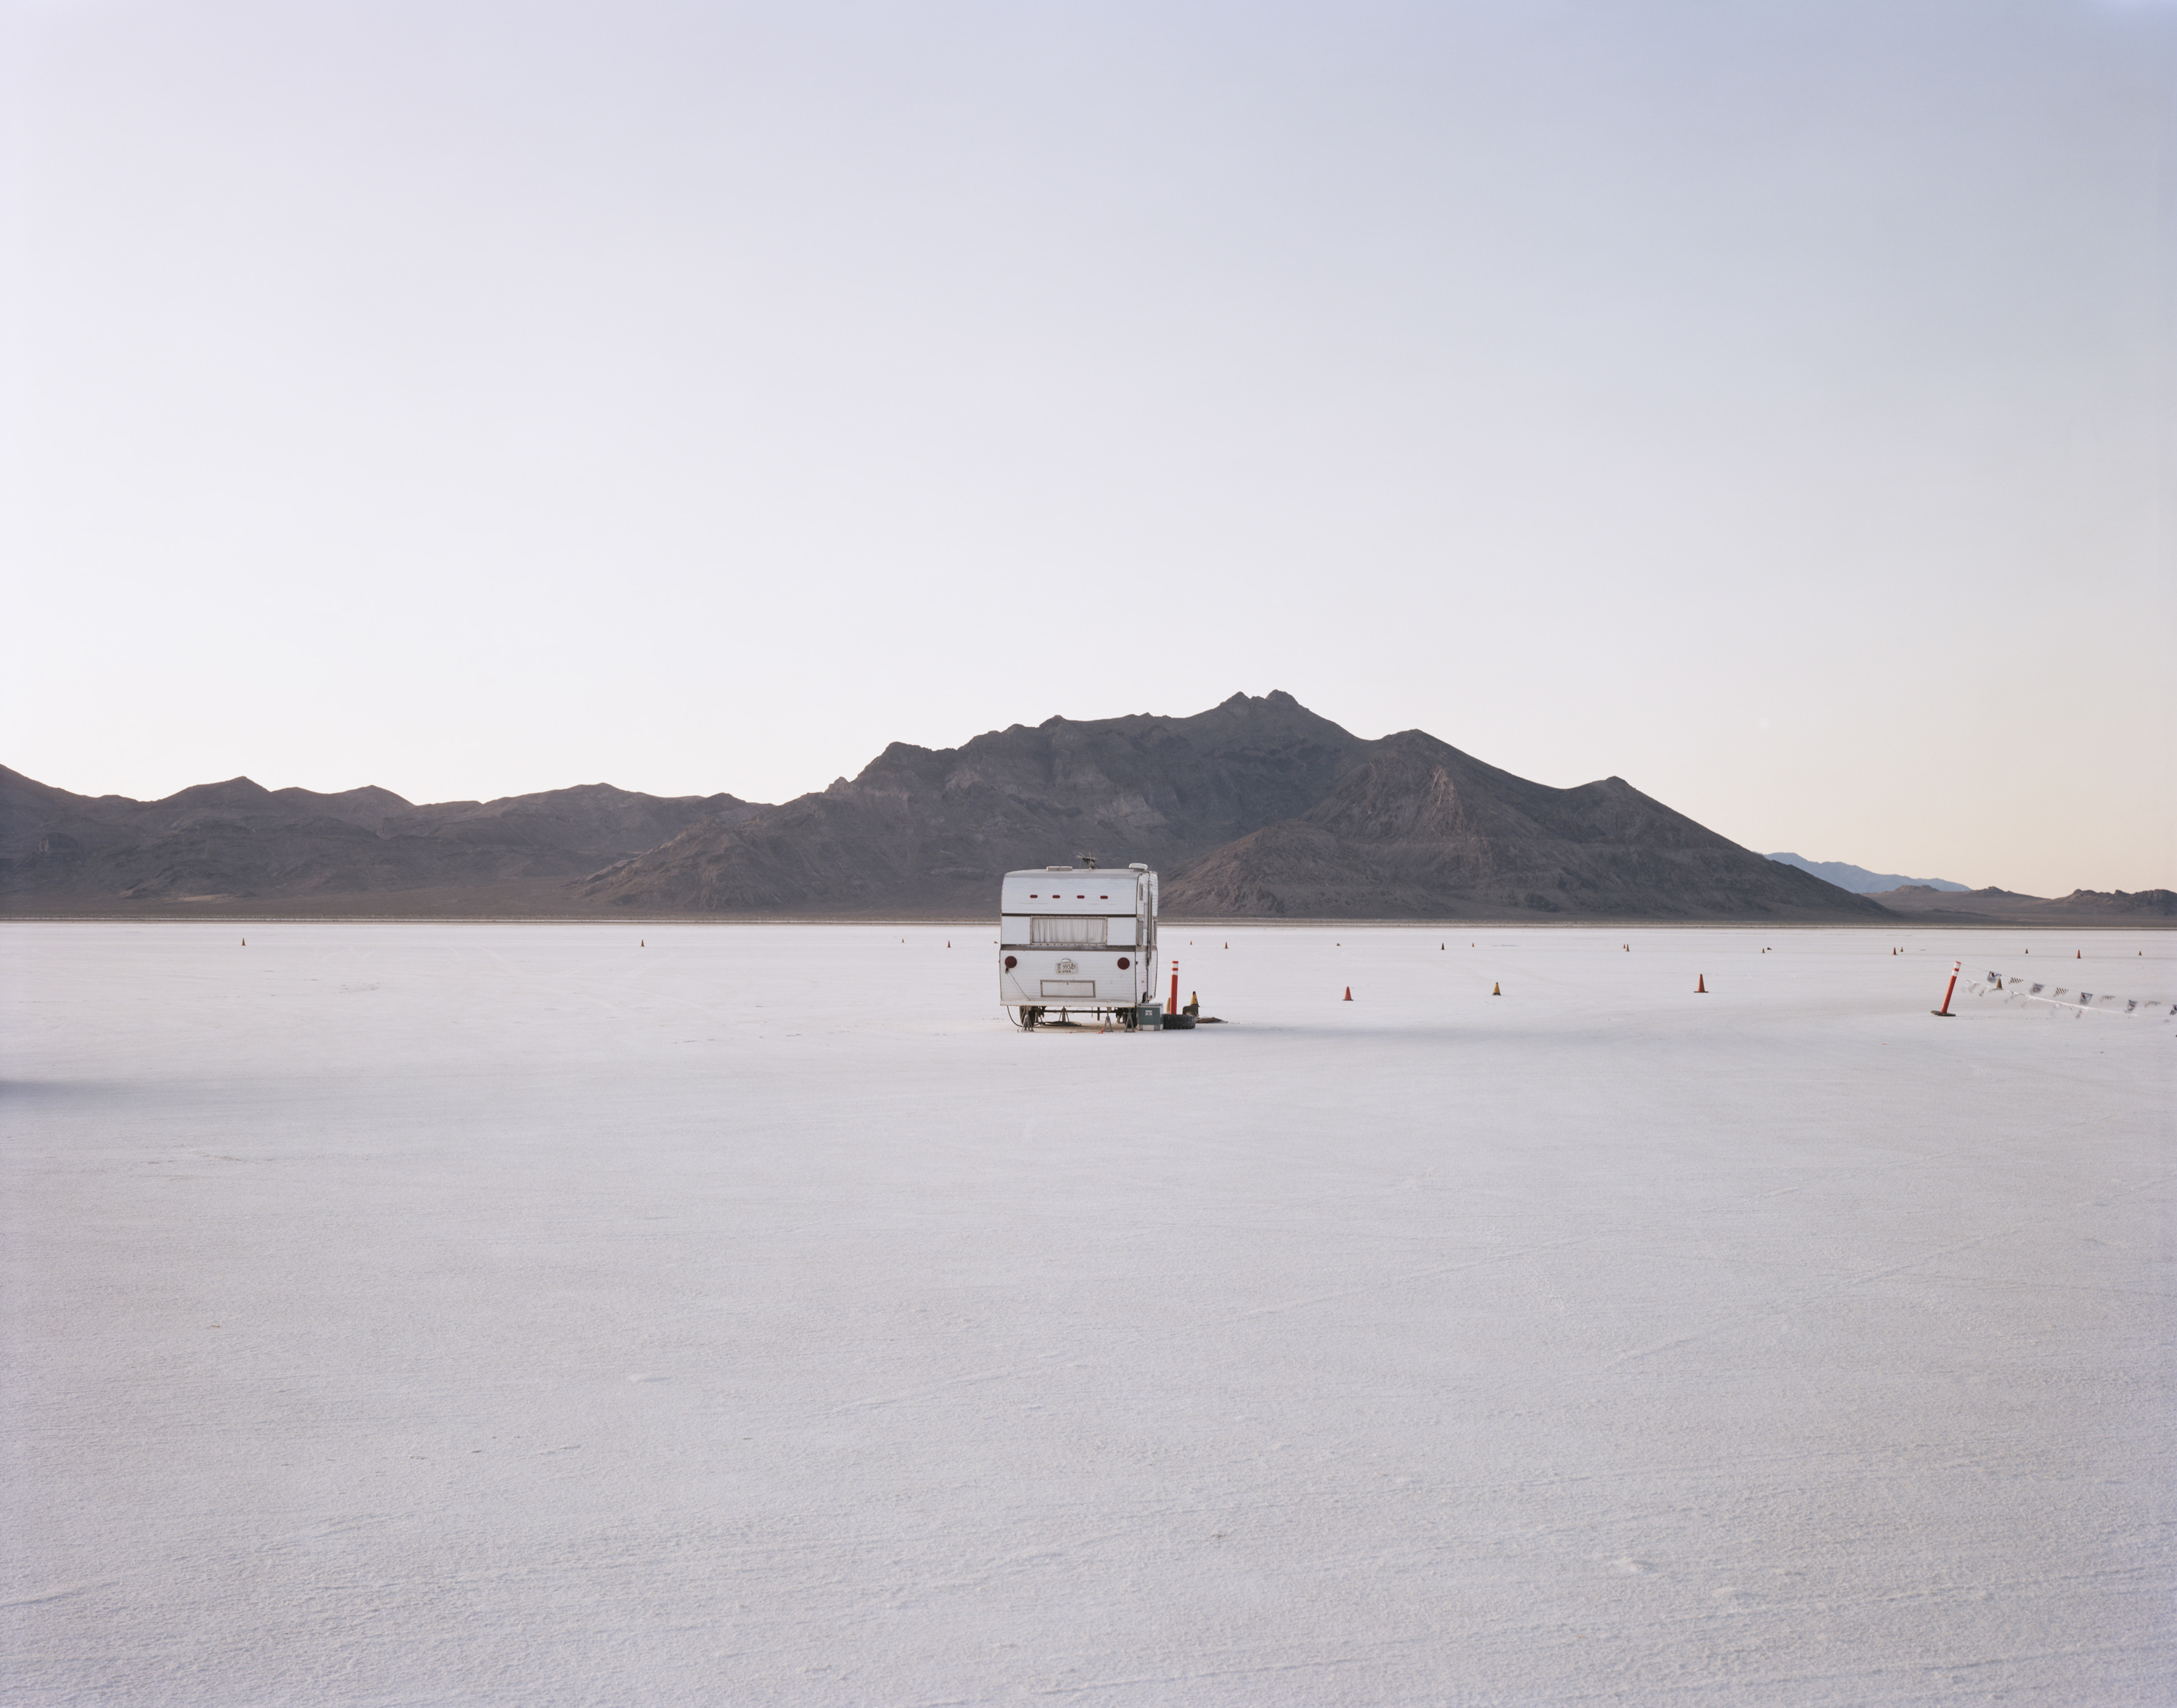 Color photograph of a camper in the middle of salt flats with mountains along the horizon